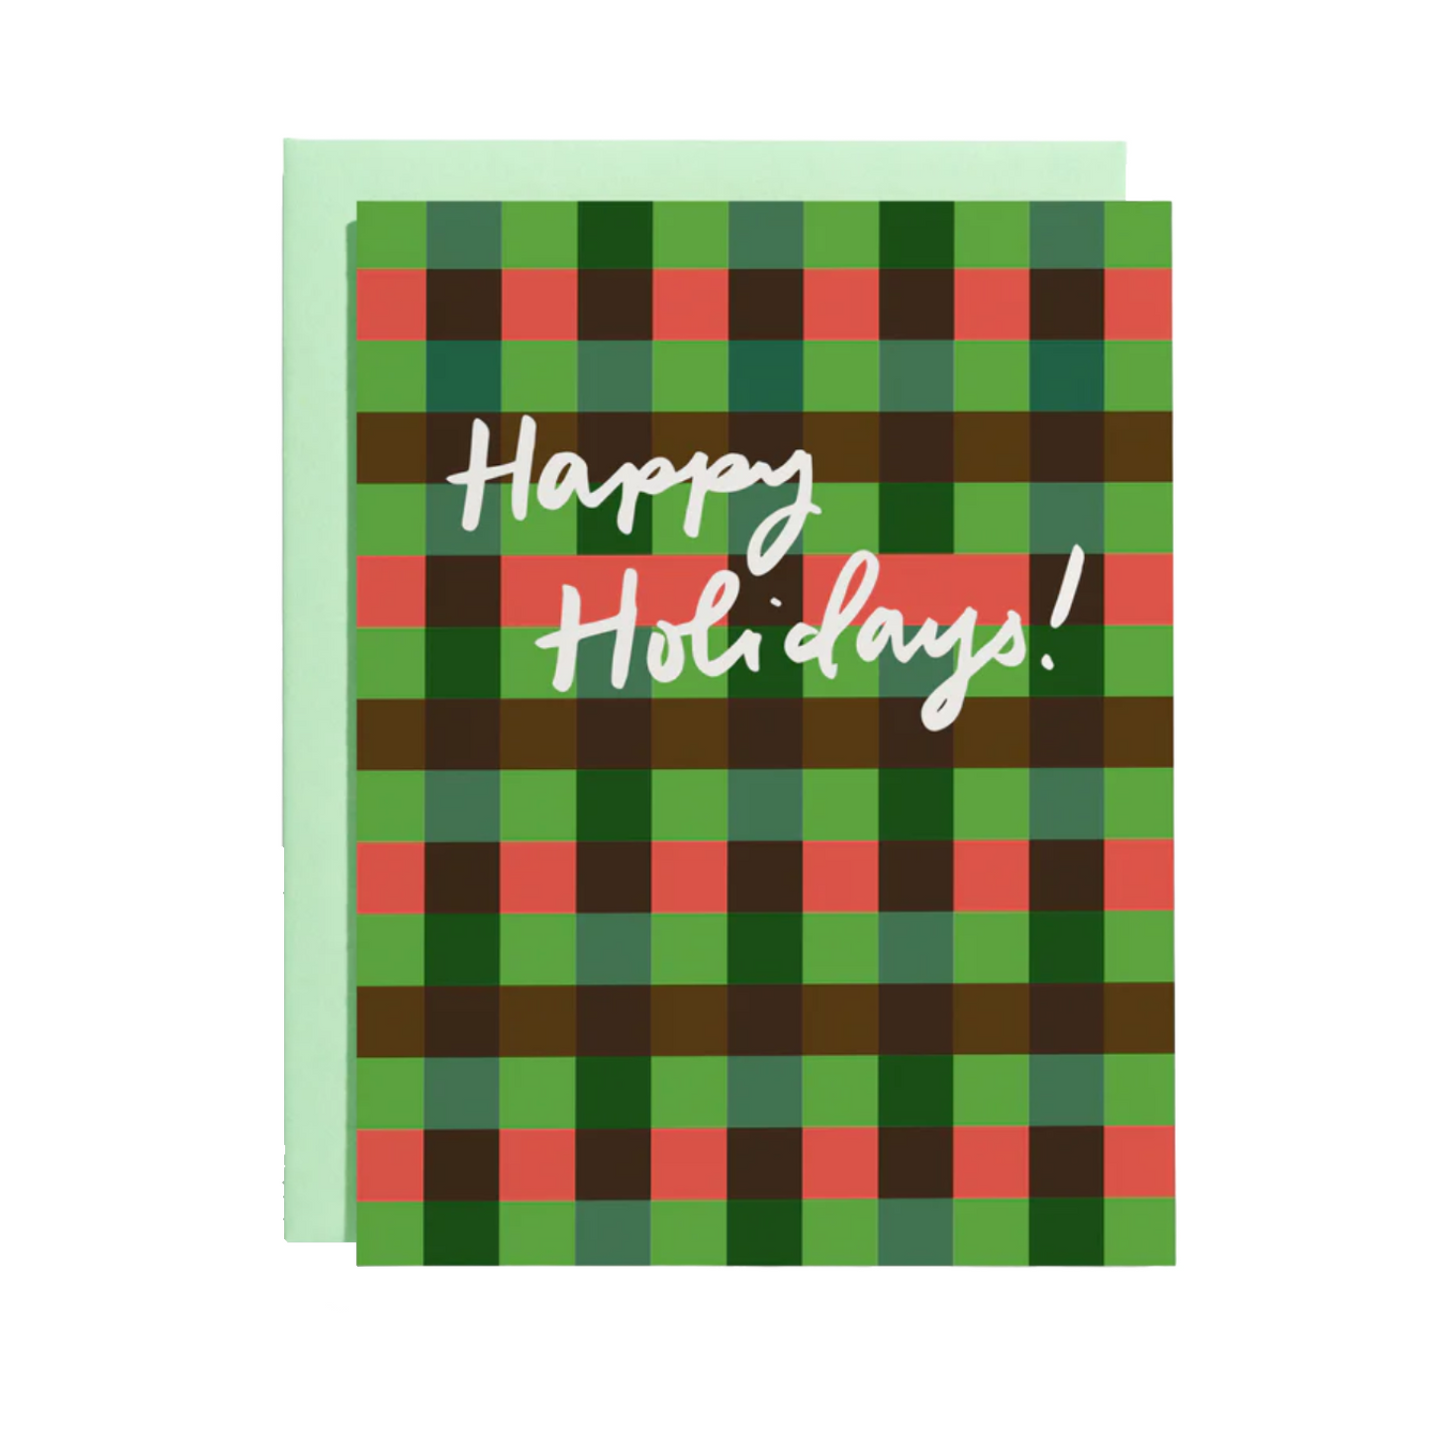 Plaid Holiday Card by Shorthand Press